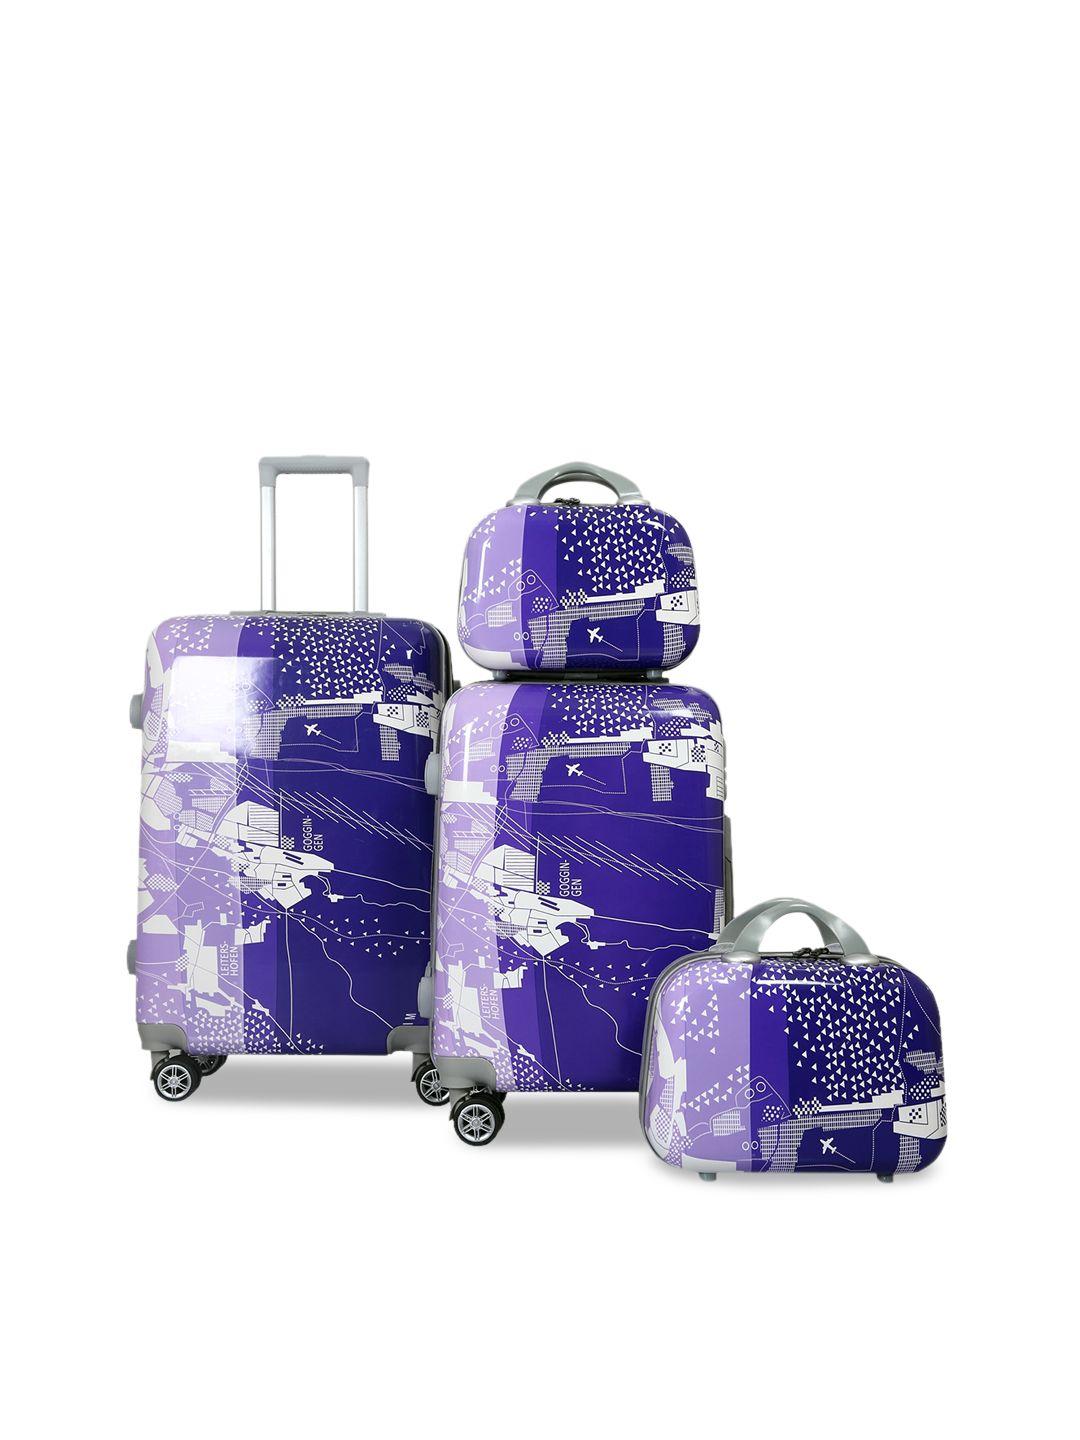 polo-class-set-of-4-printed-hard-case-luggage-trolley-&-vanity-bag